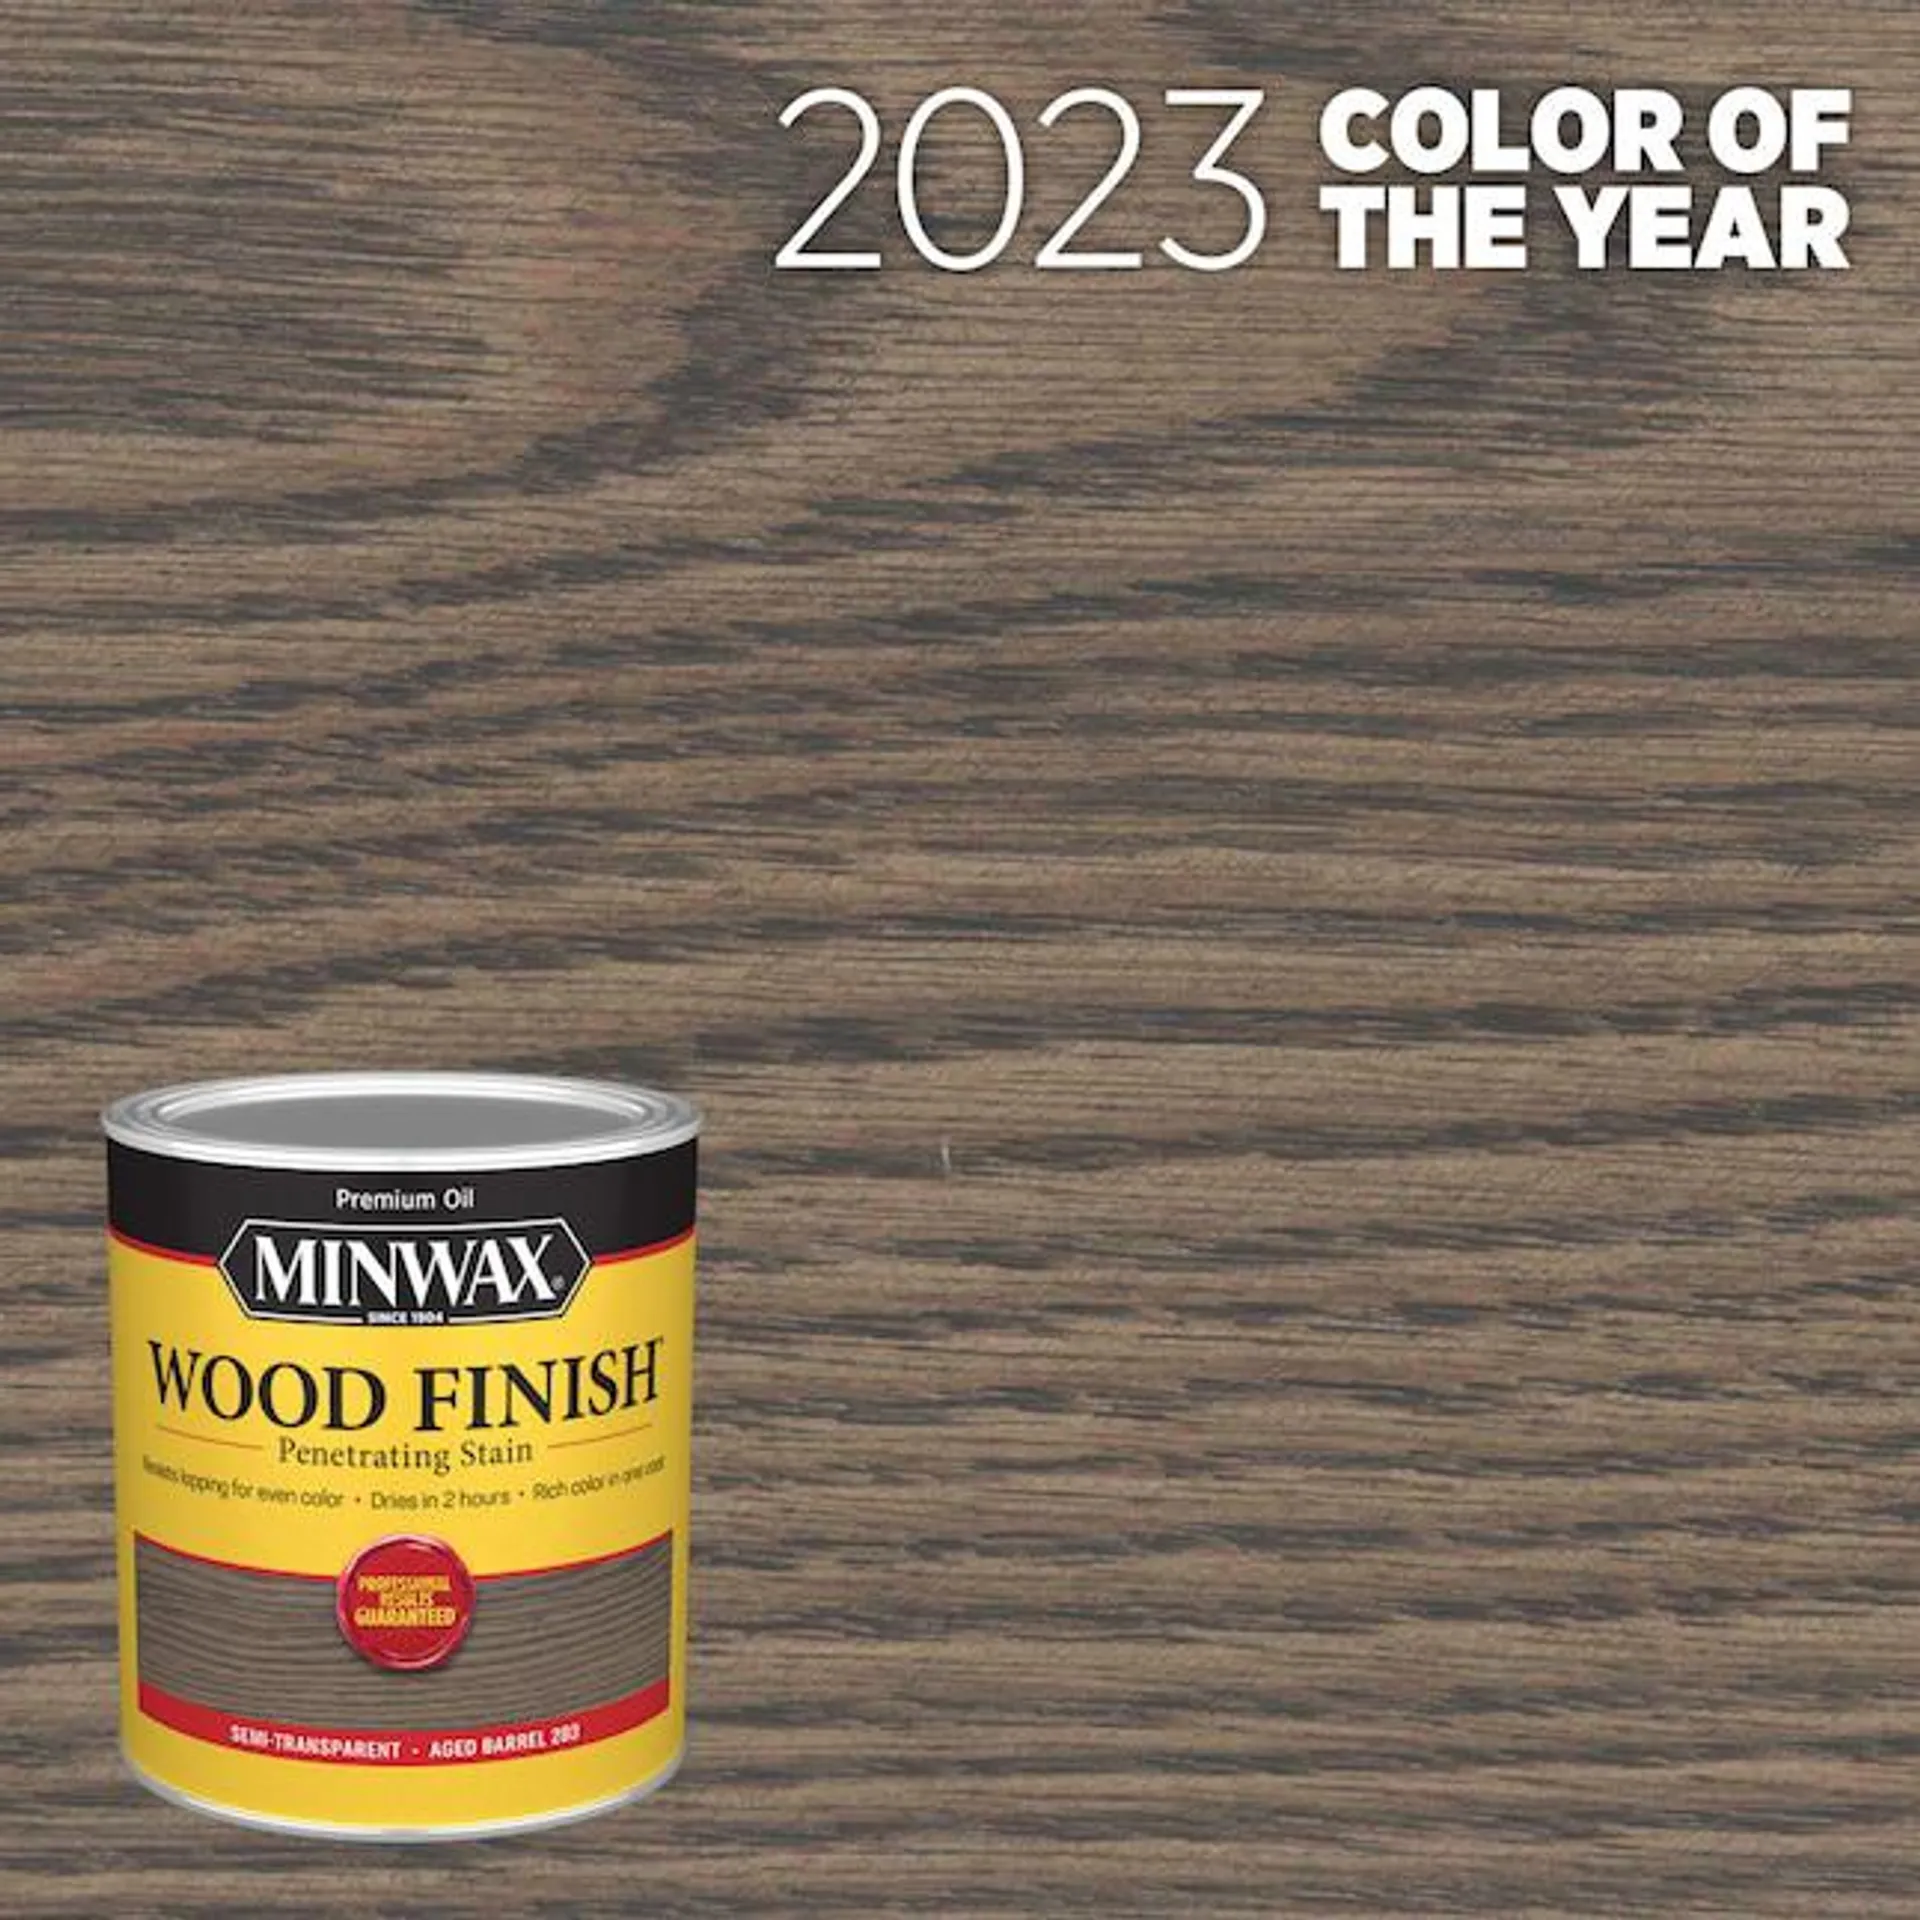 Minwax Wood Finish Oil-based 2023 Color Of The Year Aged Barrel Semi-transparent Interior Stain (1-quart)